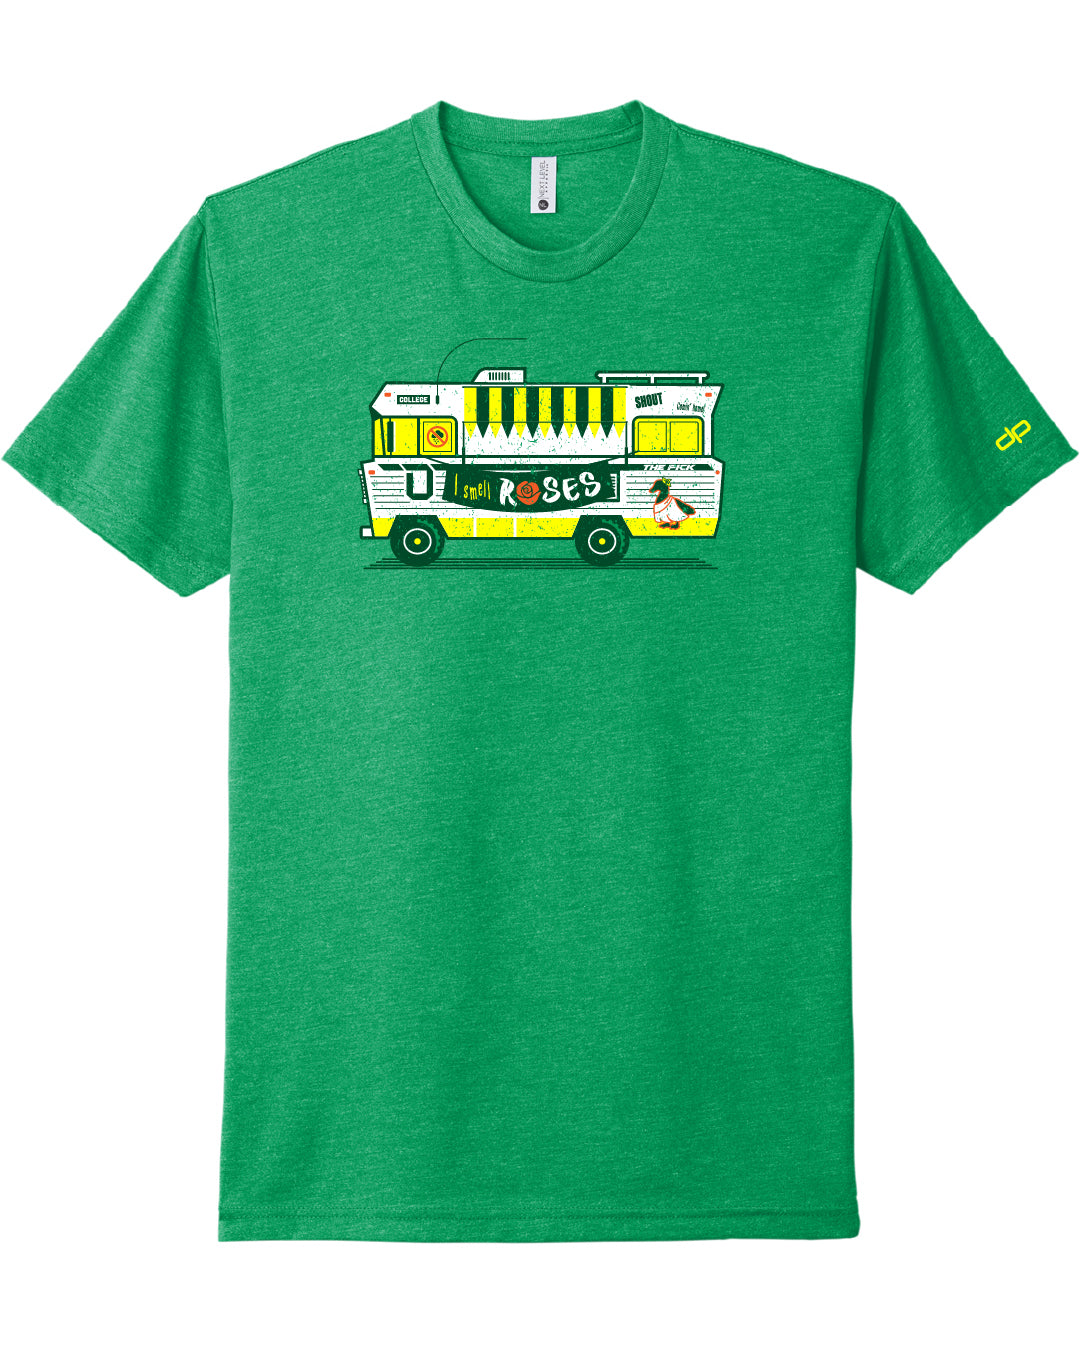 Win the Tailgate NW t-shirt